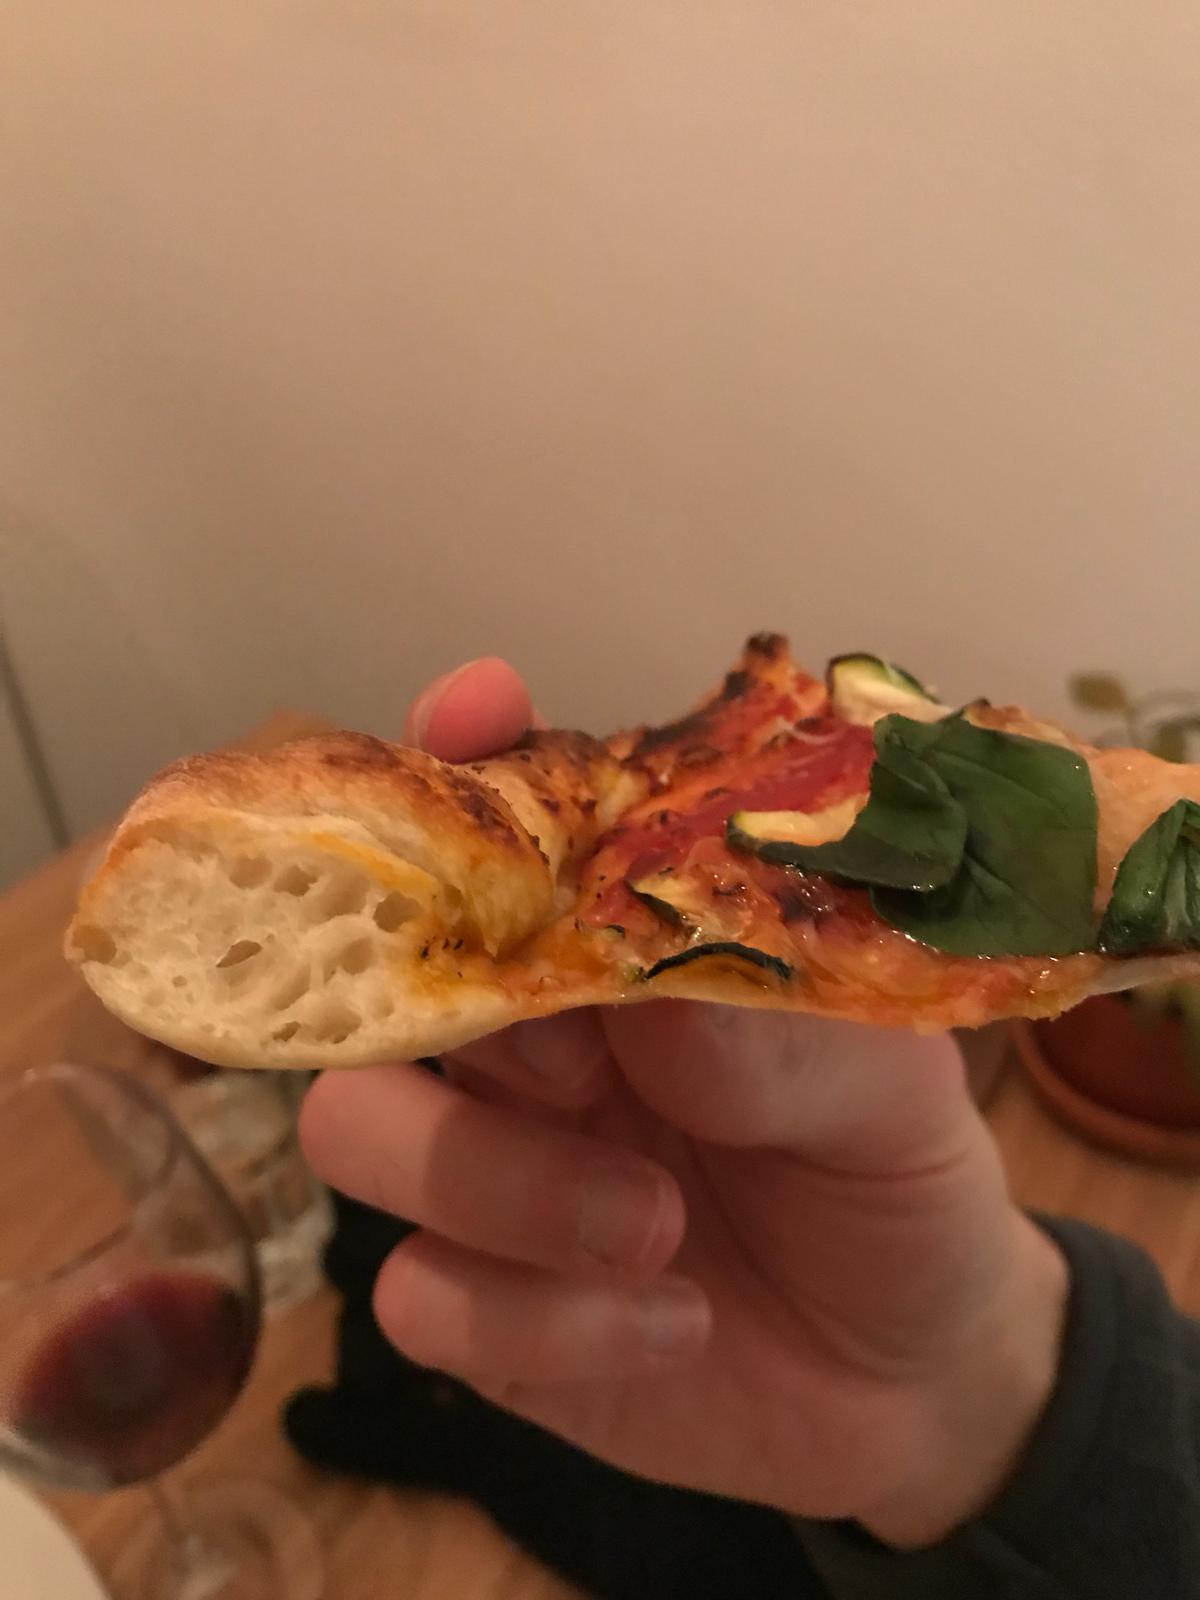 A slice of the pizza